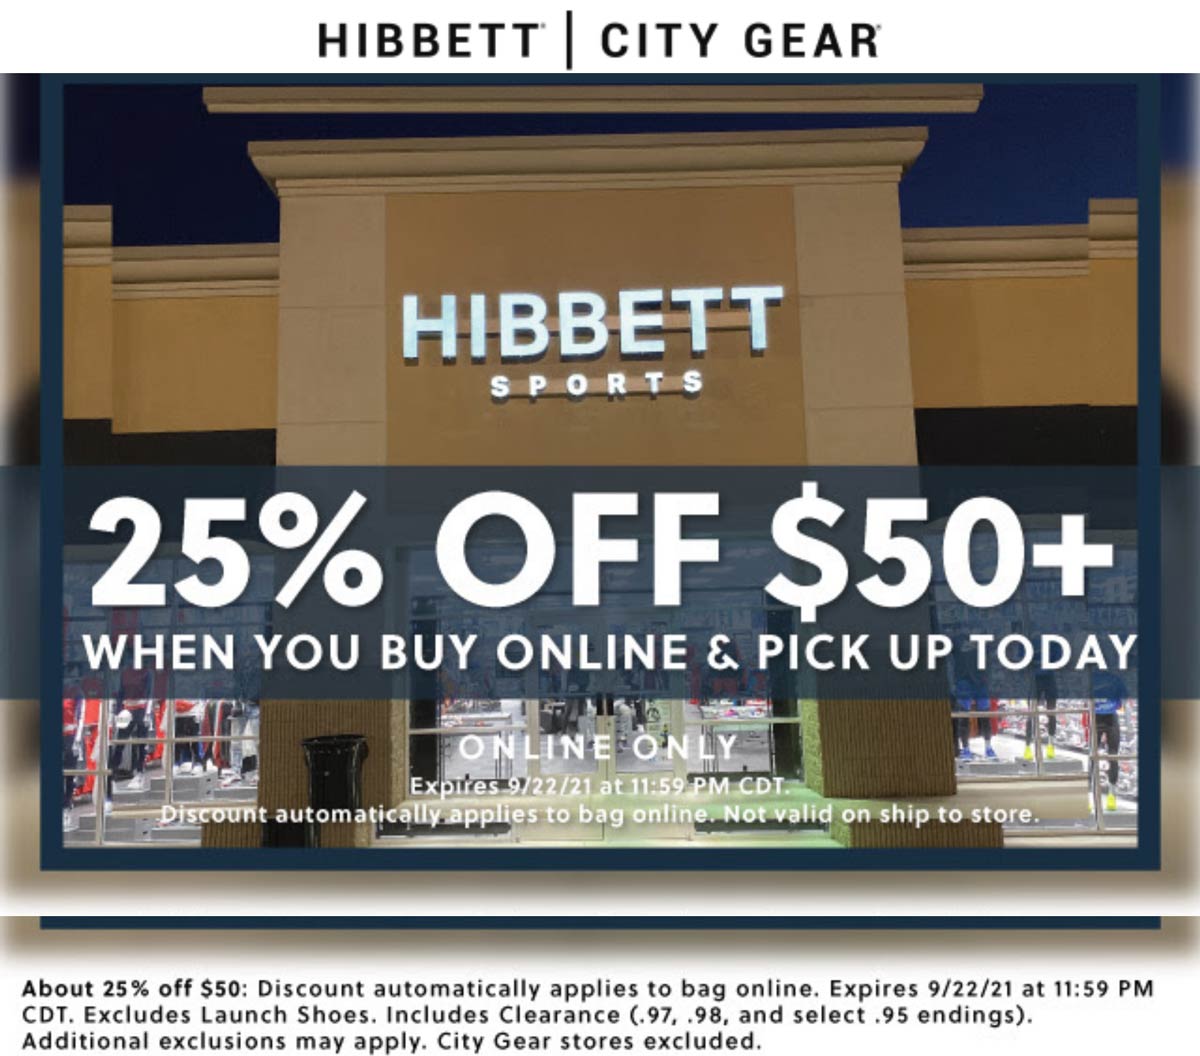 Hibbett Sports stores Coupon  25% off $50 via curbside pickup today at Hibbett Sports #hibbettsports 